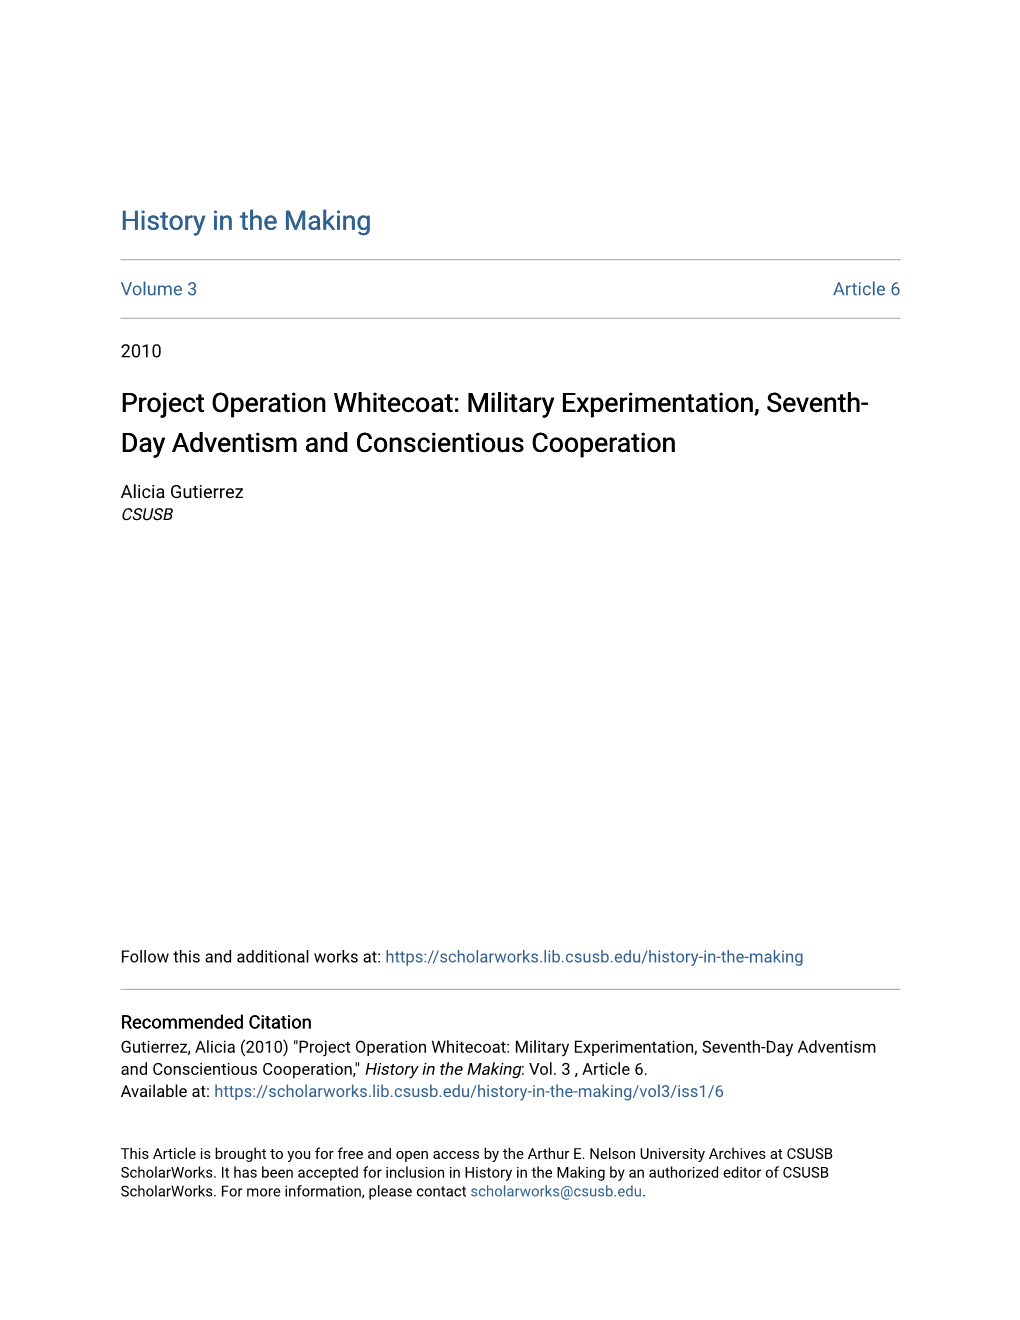 Project Operation Whitecoat: Military Experimentation, Seventh- Day Adventism and Conscientious Cooperation